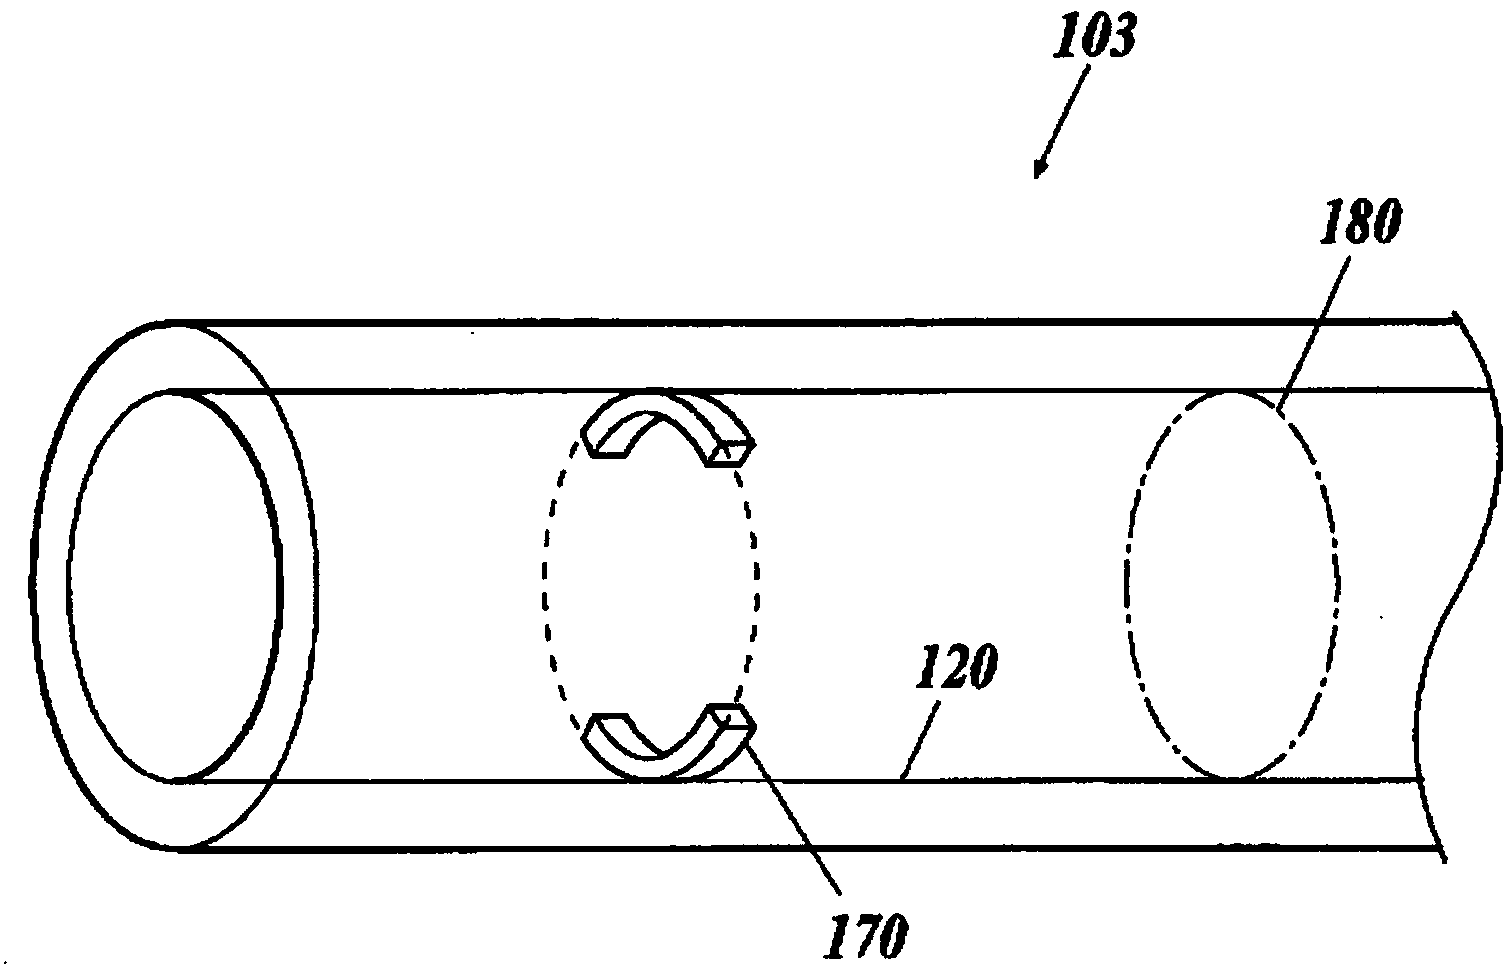 Plasma device for production of metal powder